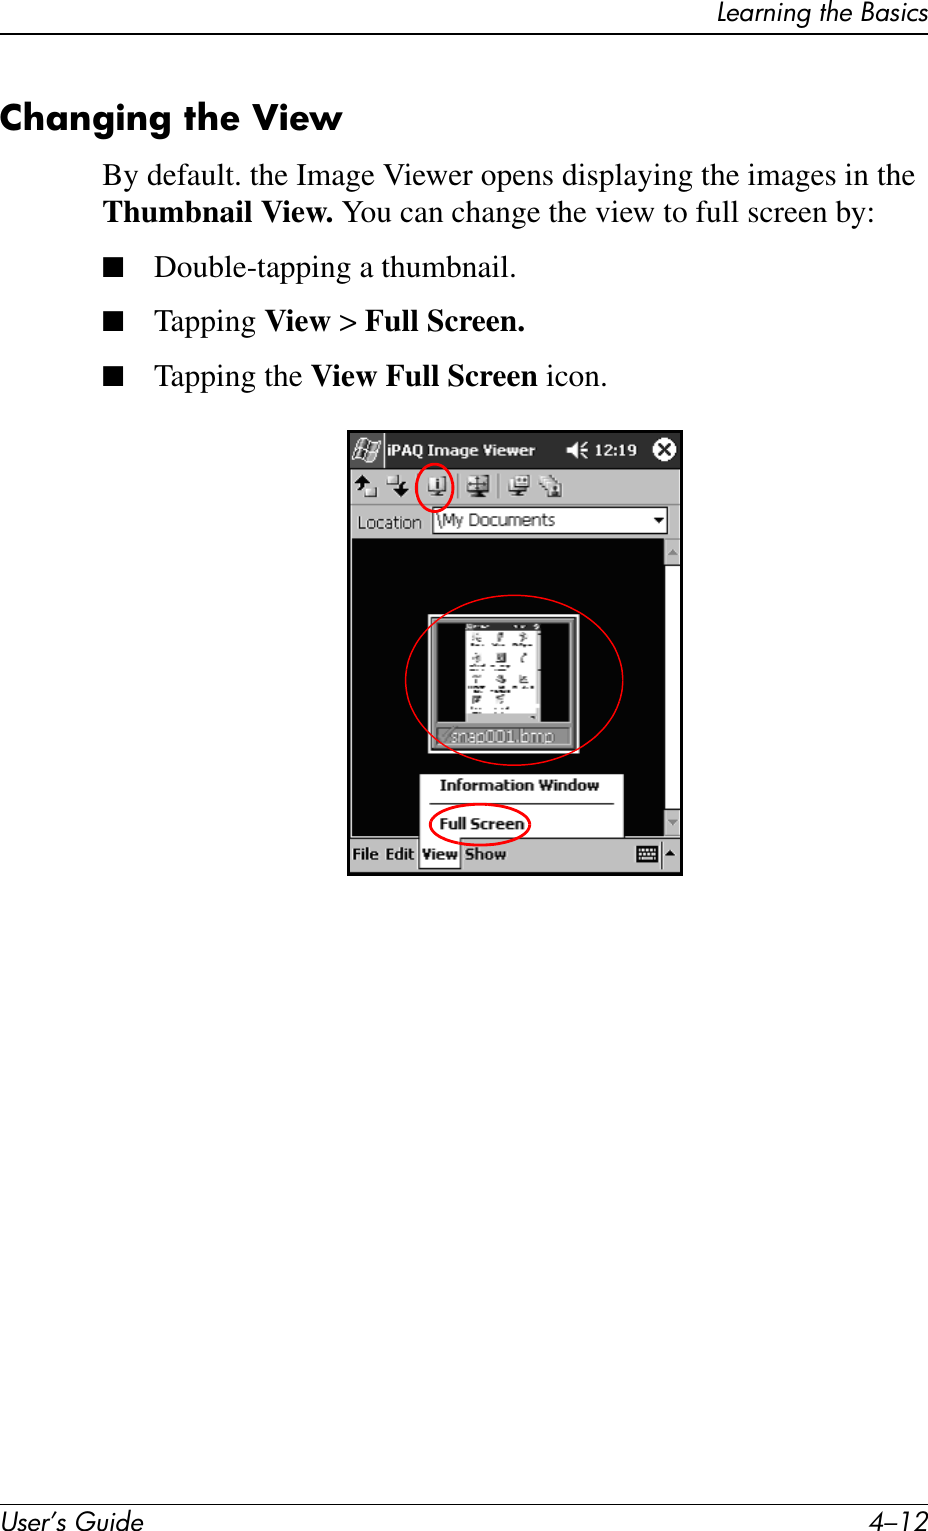 User’s Guide 4–12Learning the BasicsChanging the ViewBy default. the Image Viewer opens displaying the images in the Thumbnail View. You can change the view to full screen by:■Double-tapping a thumbnail.■Tapping View &gt; Full Screen.■Tapping the View Full Screen icon.